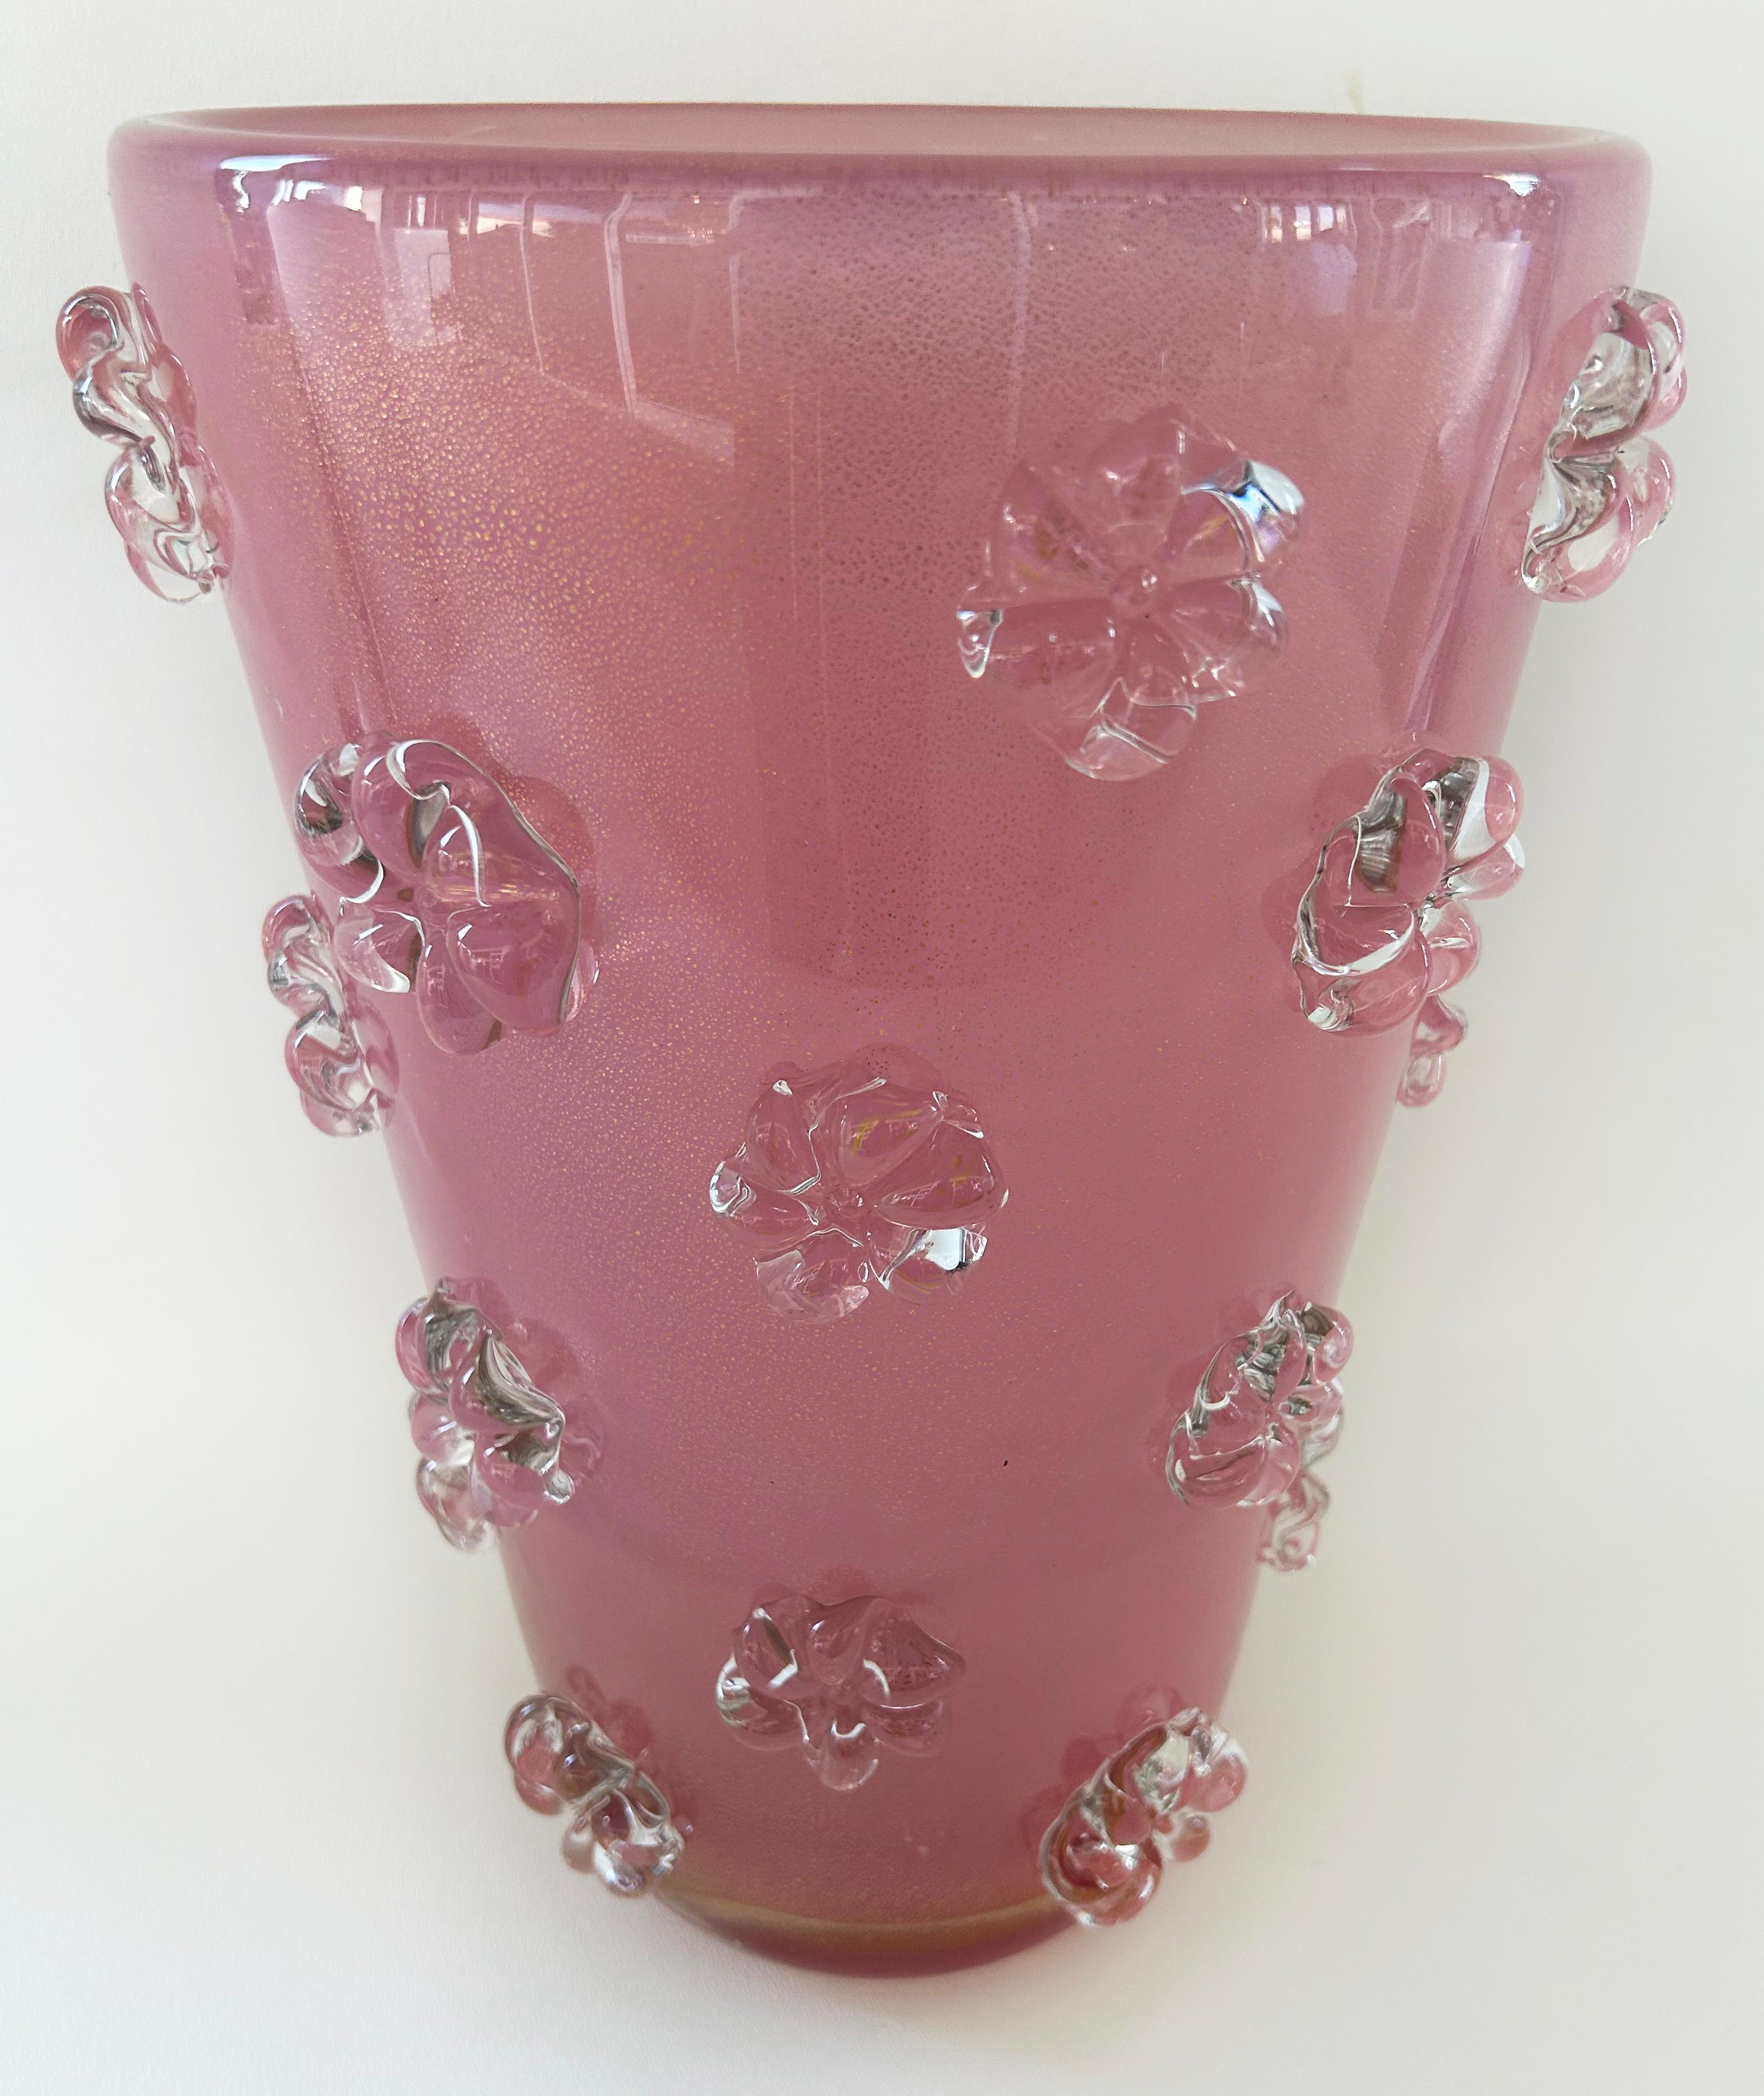 Barovier&Toso Murano Glass Vase, Gold Inclusions, Floral Applications

Offered for sale is a Murano glass vase in pink with gold inclusions and clear glass floral applications that is attributed to Barovier&Toso. The vase no longer retains the